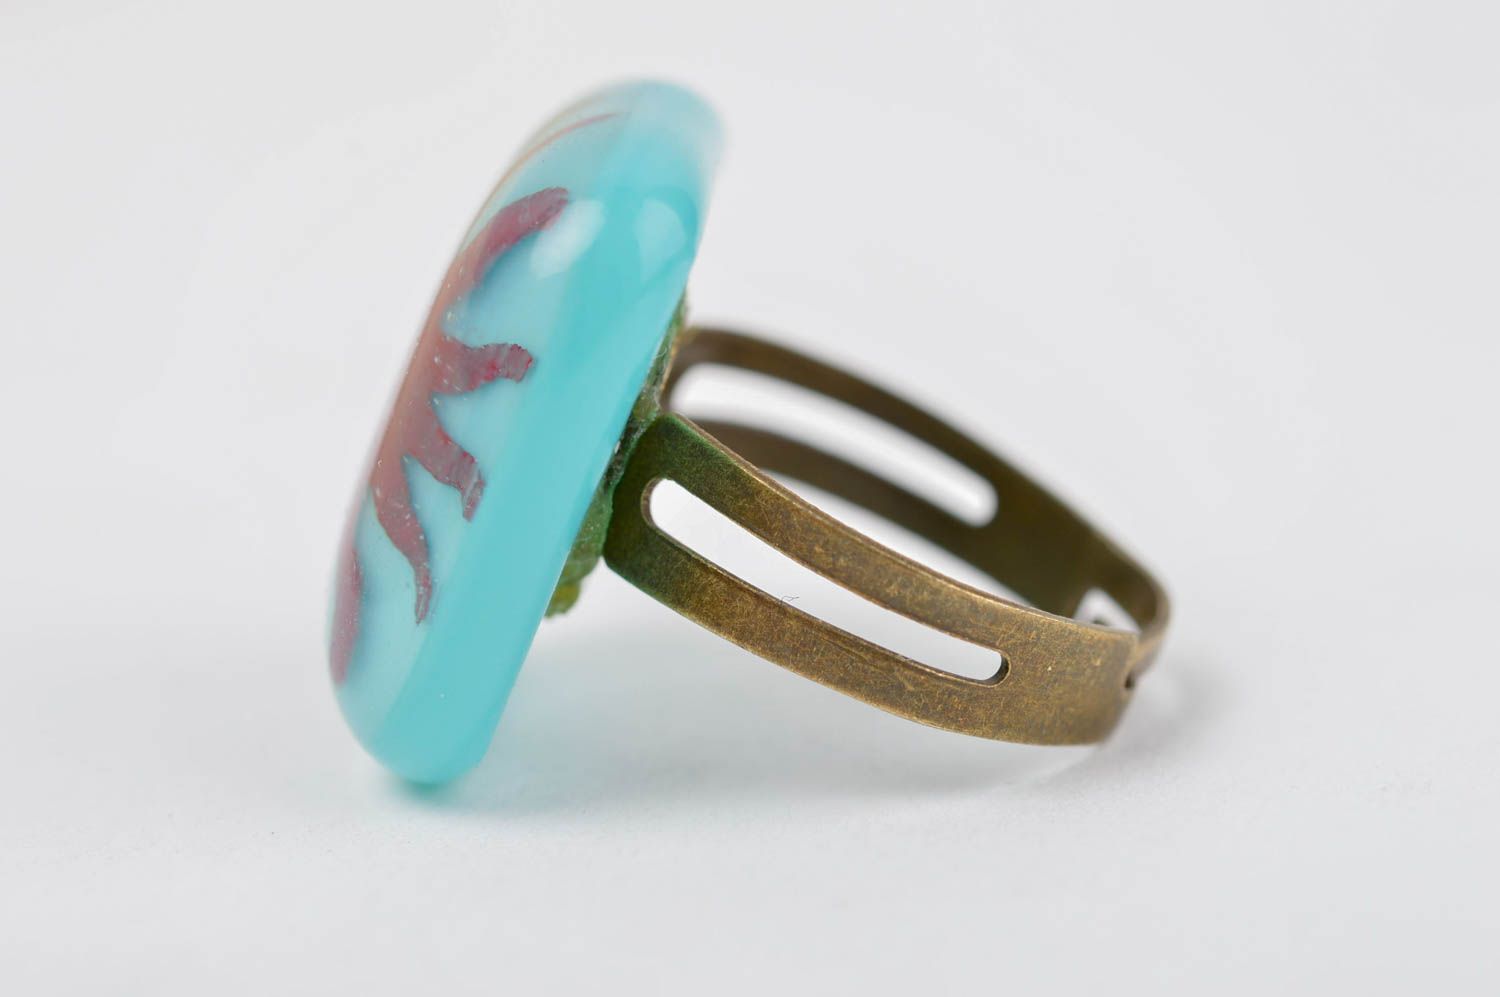 Stylish handmade glass ring fused glass jewelry designs accessories for girls photo 2